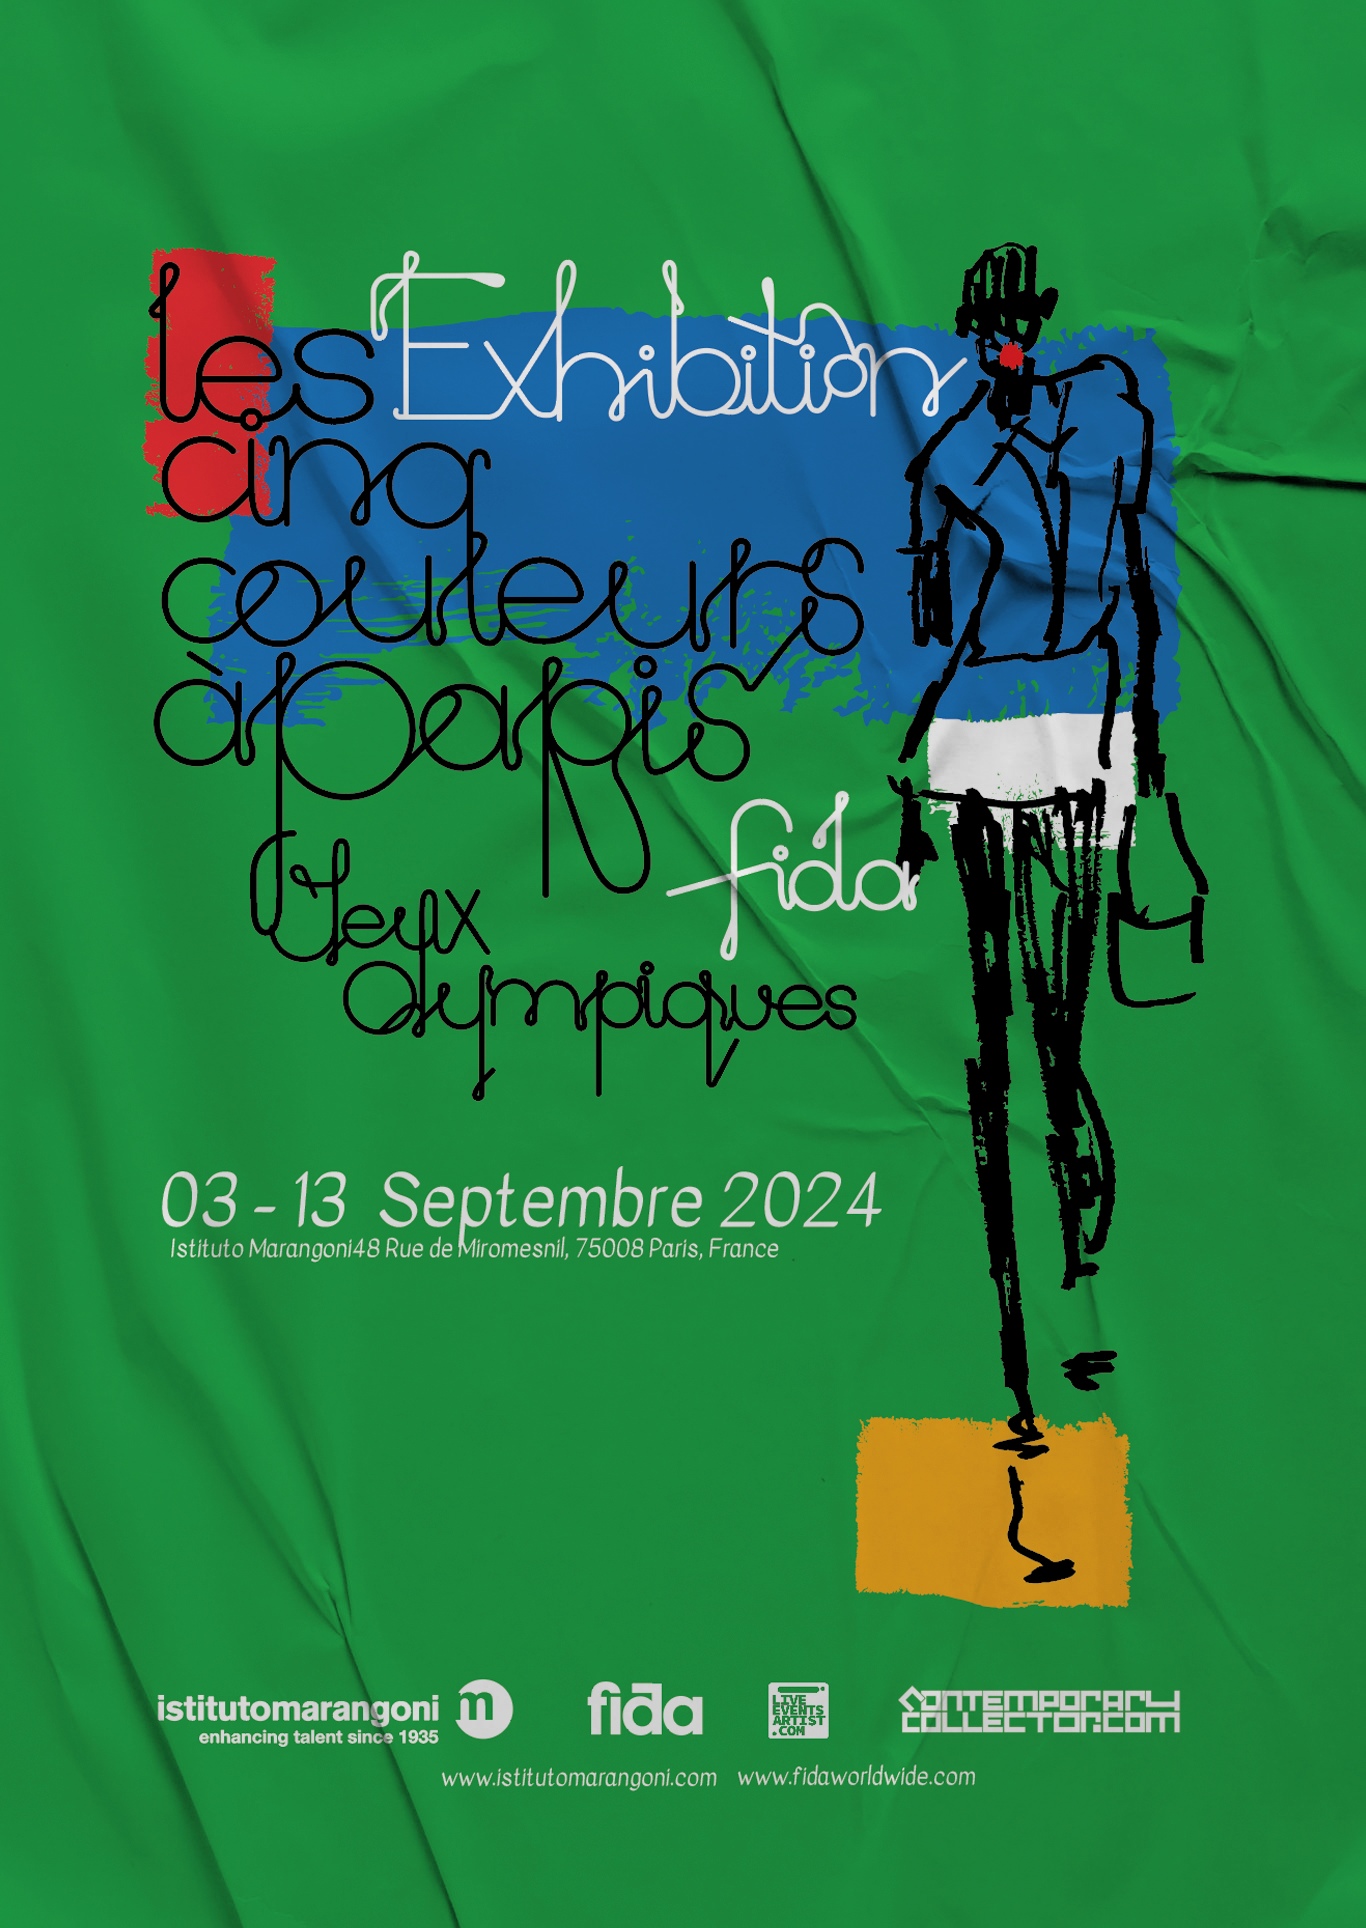 '5 Colours of Paris' - Olympics Exhibition in Paris - EARLY BIRD FEES